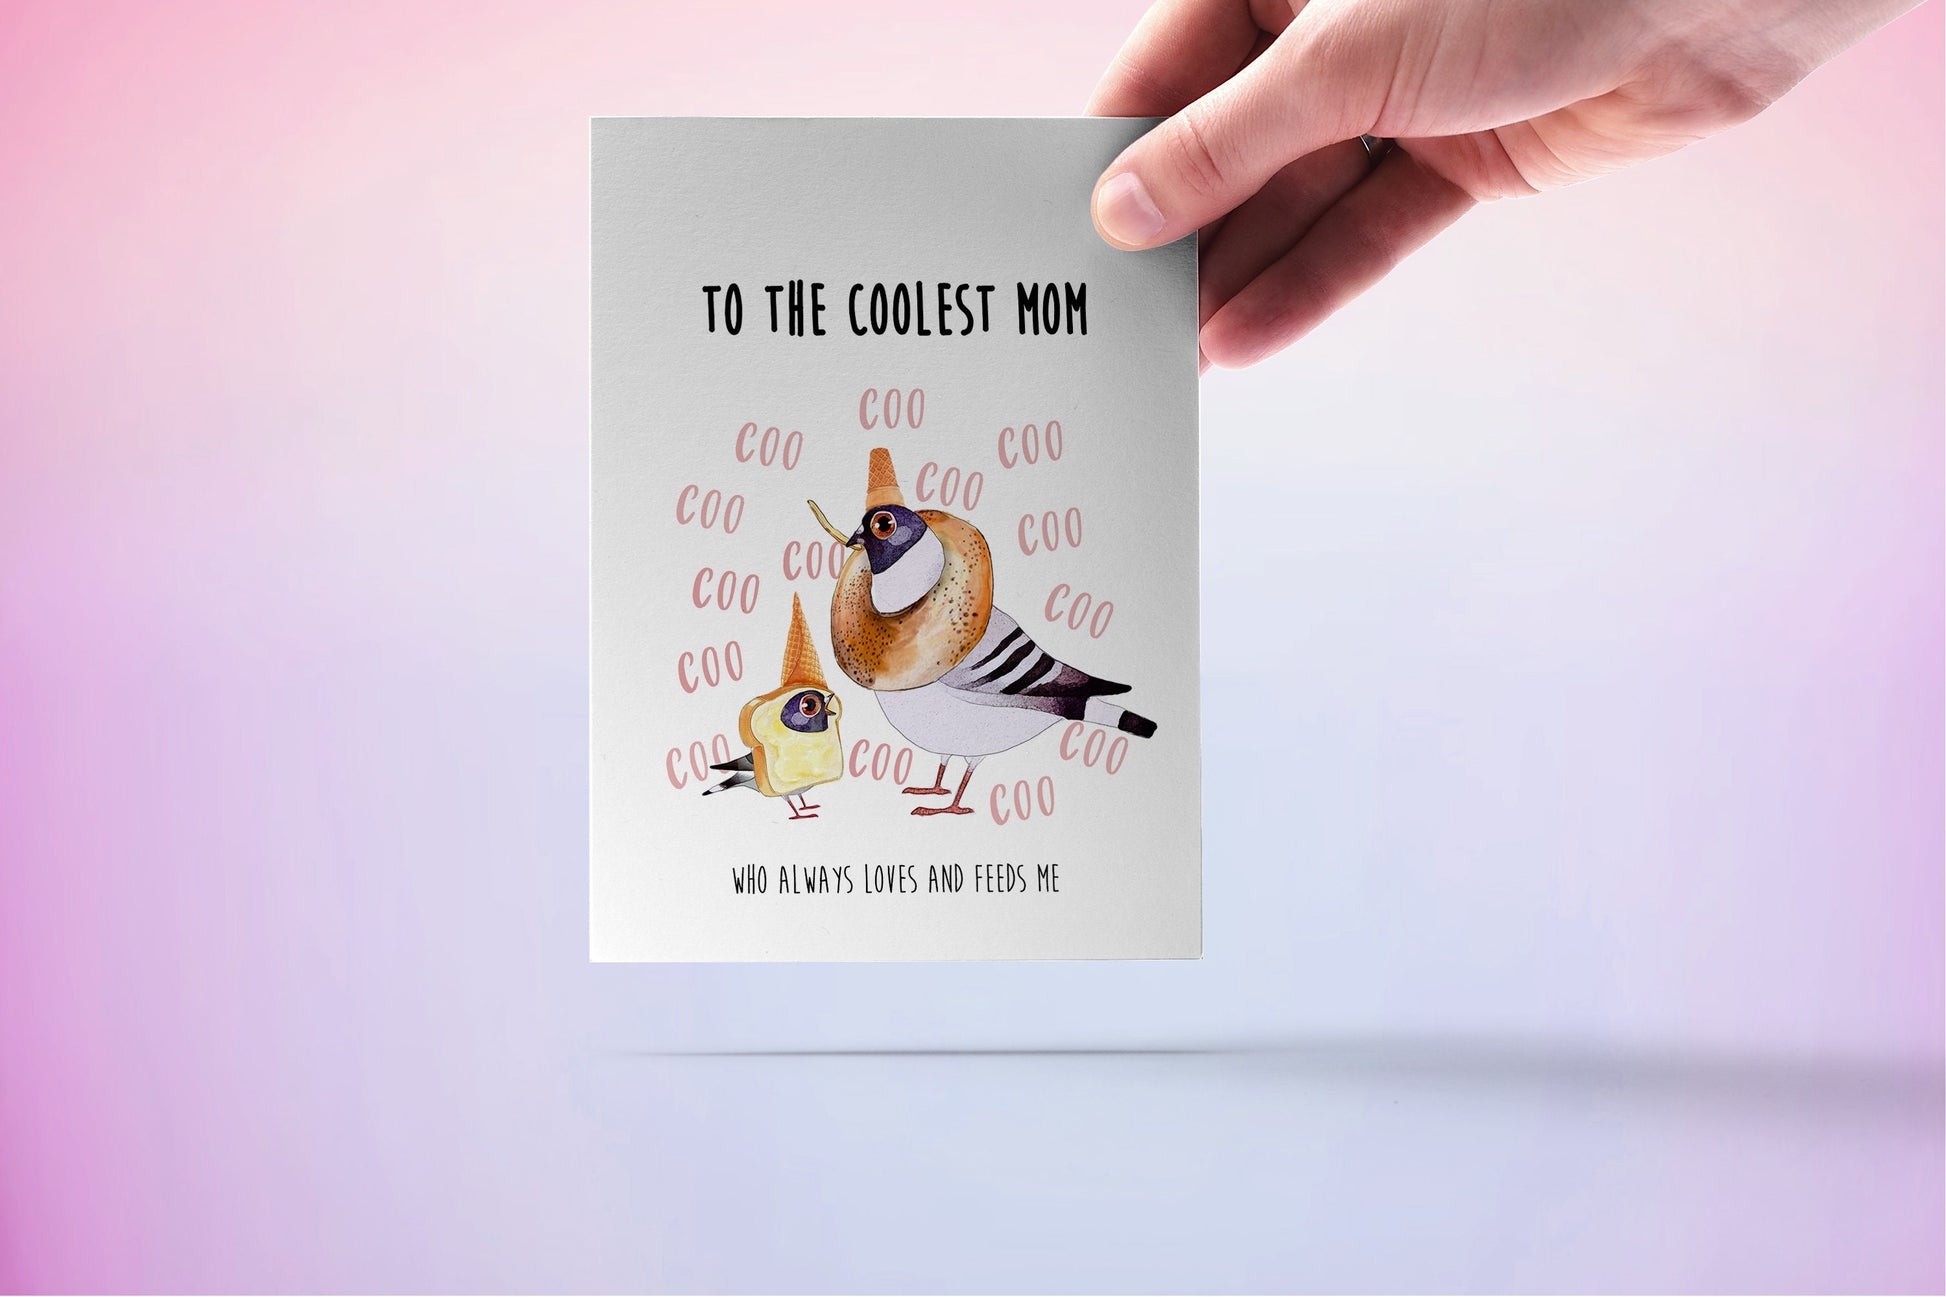 Pigeon Bird Mothers Day Card Funny - Cool Mom Birthday Card From Daughter - Always Love And Feed Me